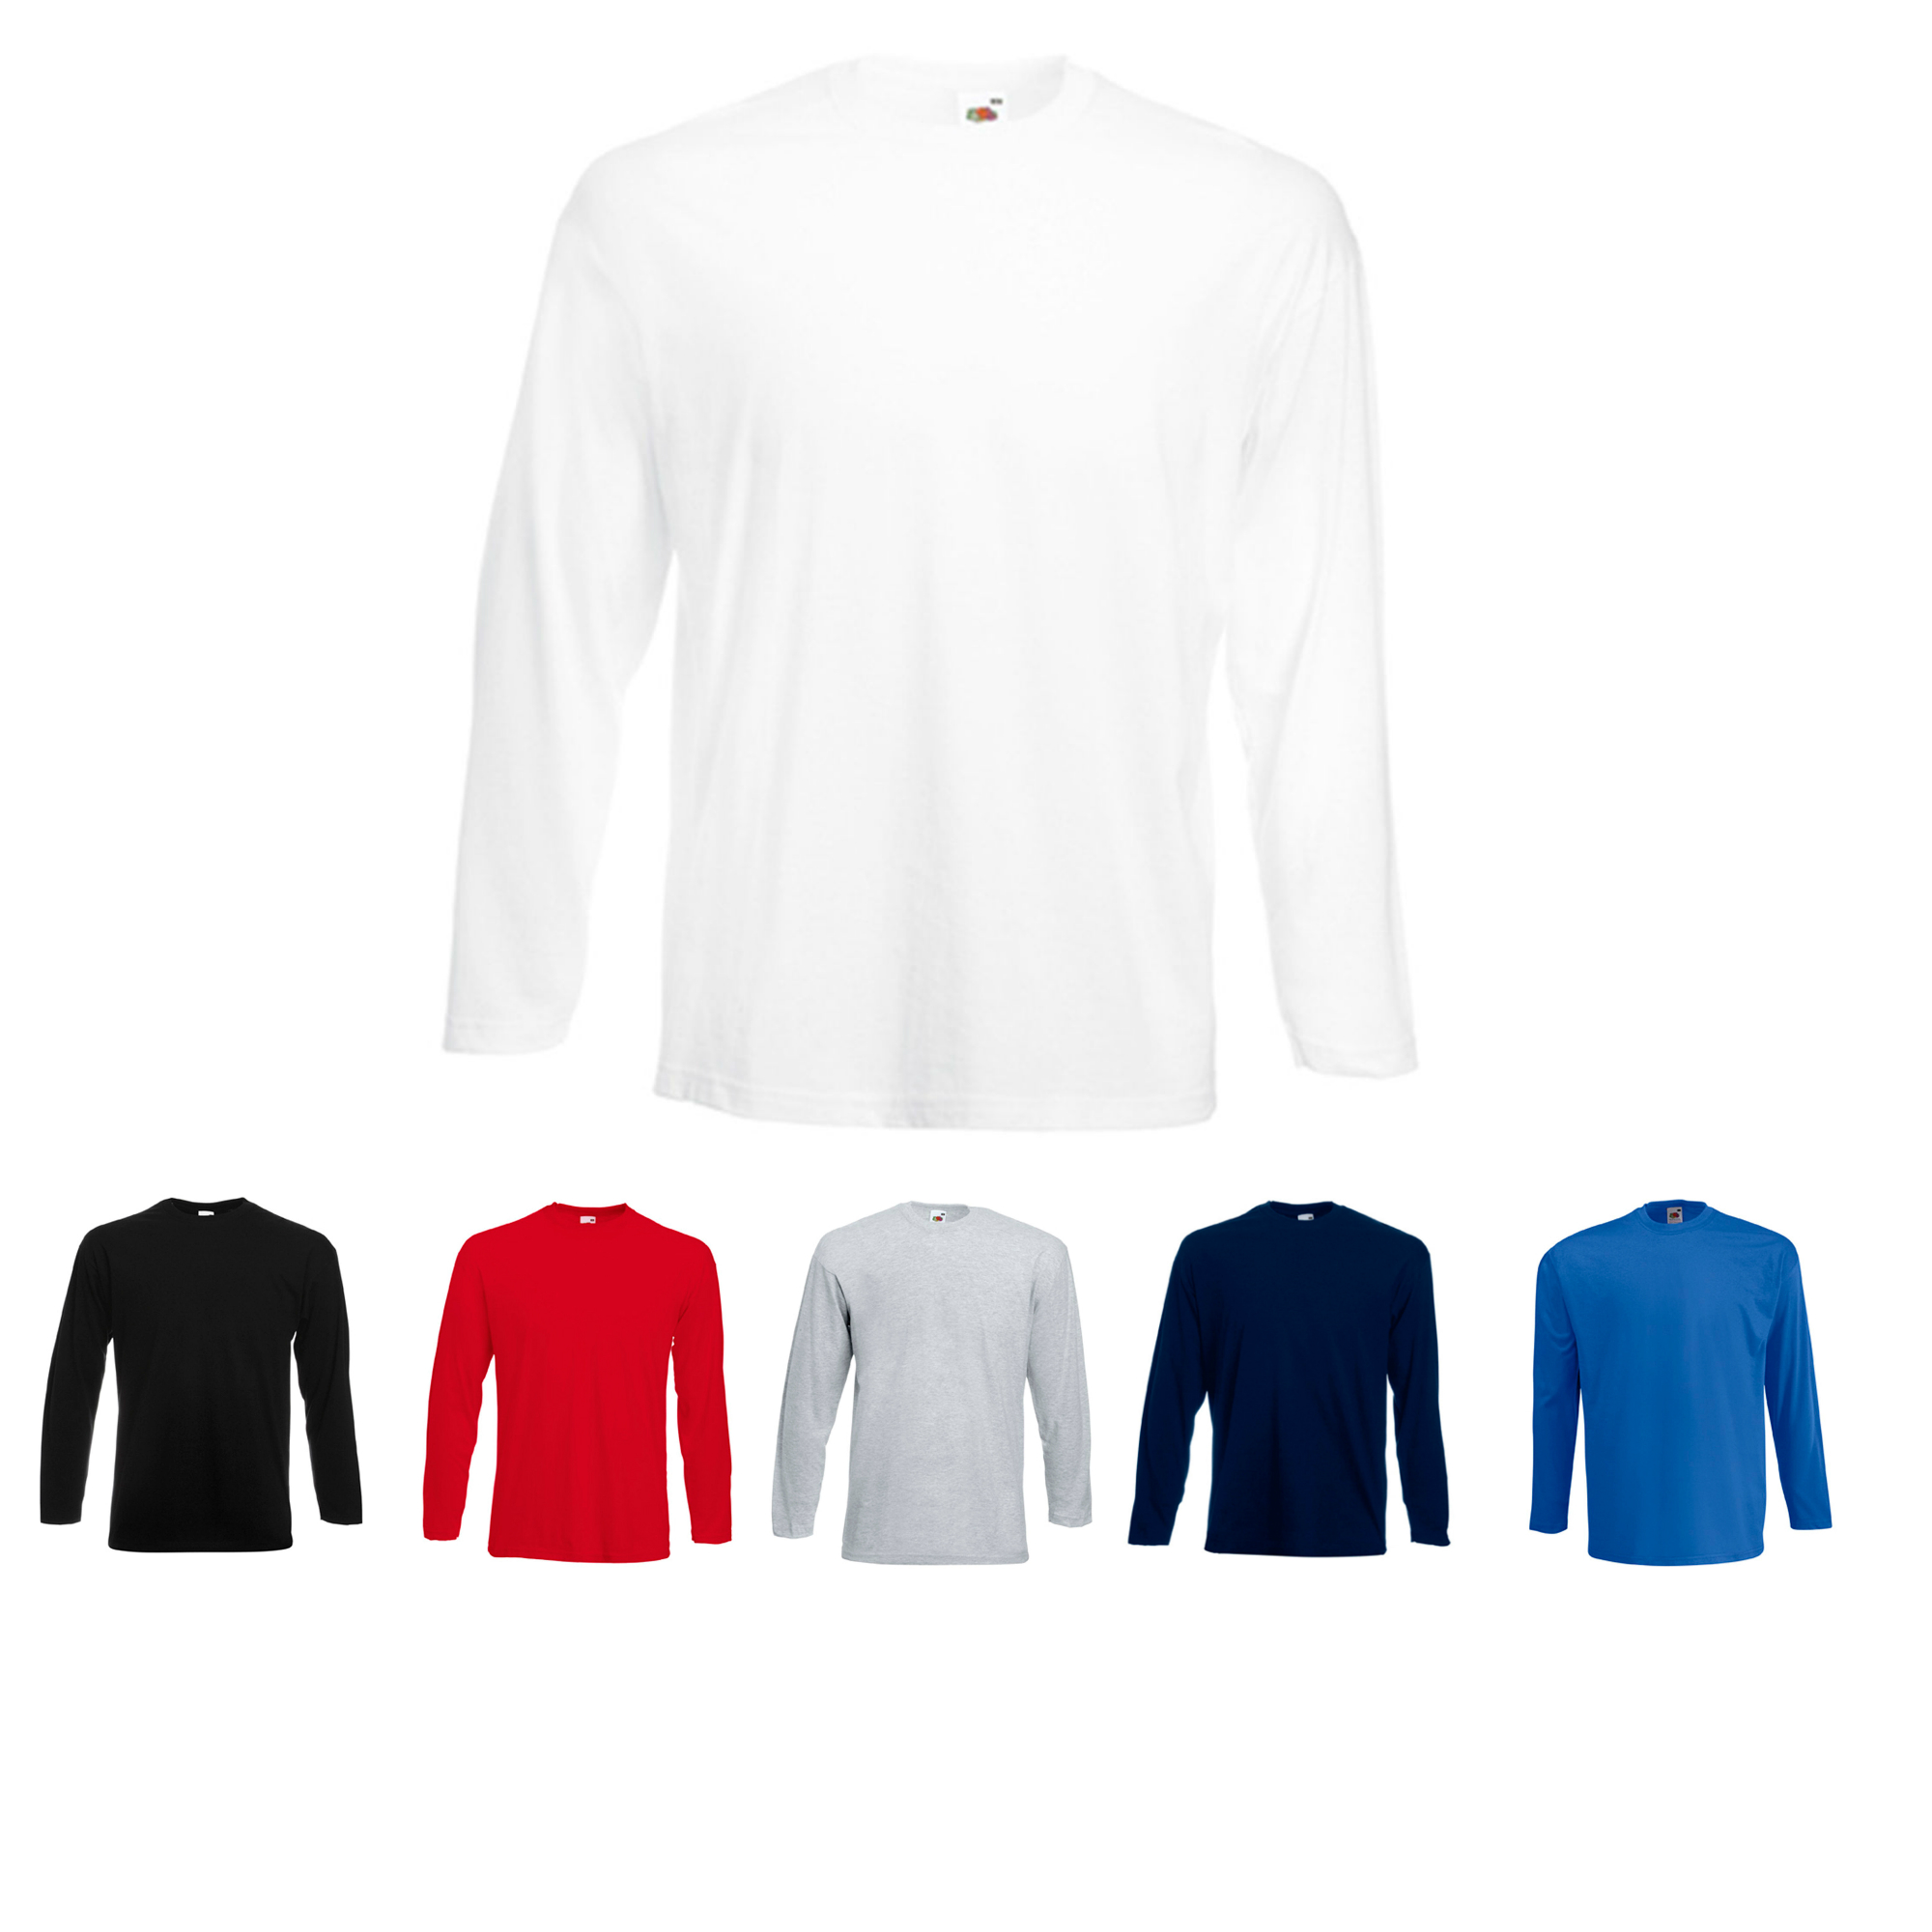 Standard Long Sleeves T-Shirt | Branded Safety Workwear | Safety Stock